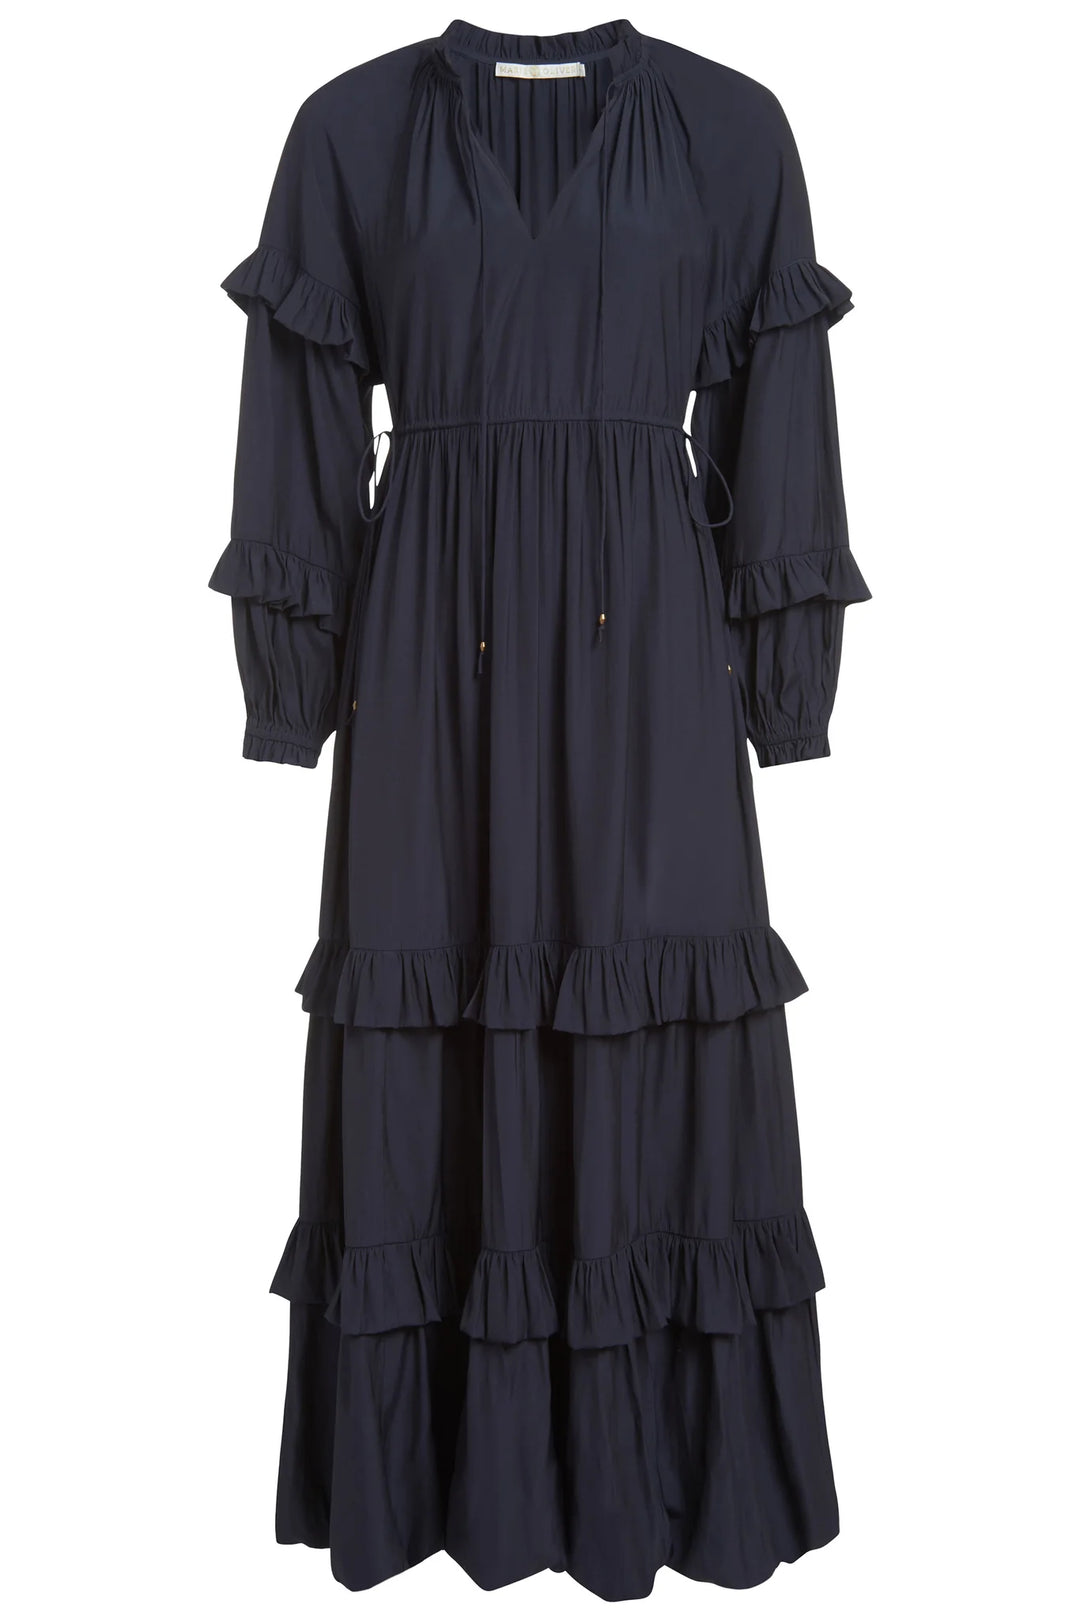 Marie Oliver Cove Dress -Midnight